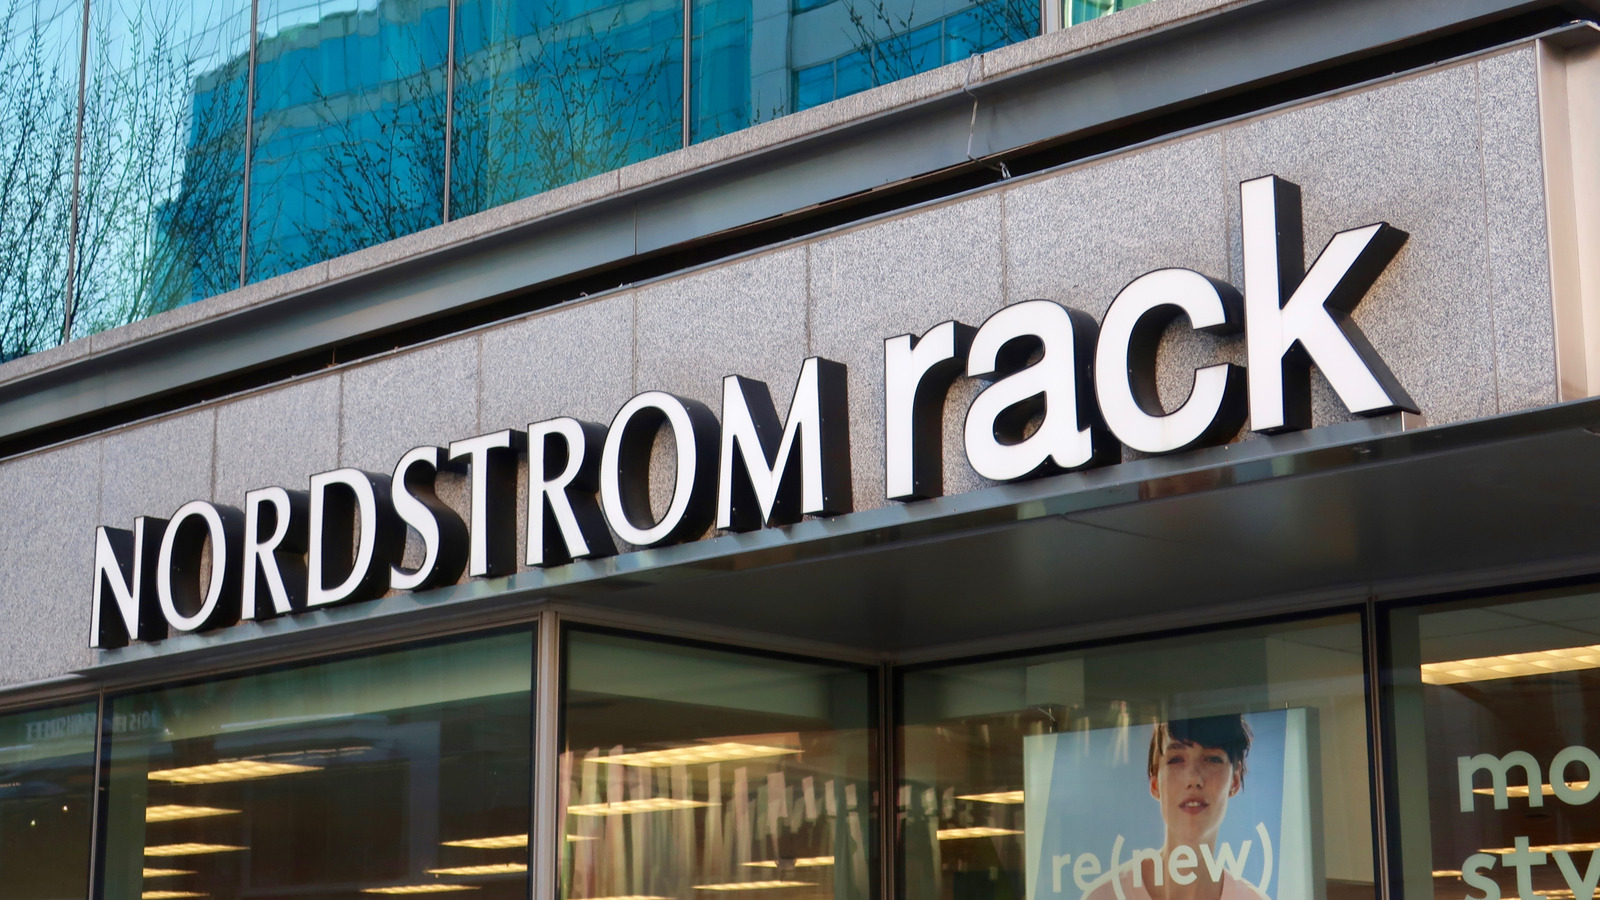 The Real Reason Nordstrom Rack Is So Cheap